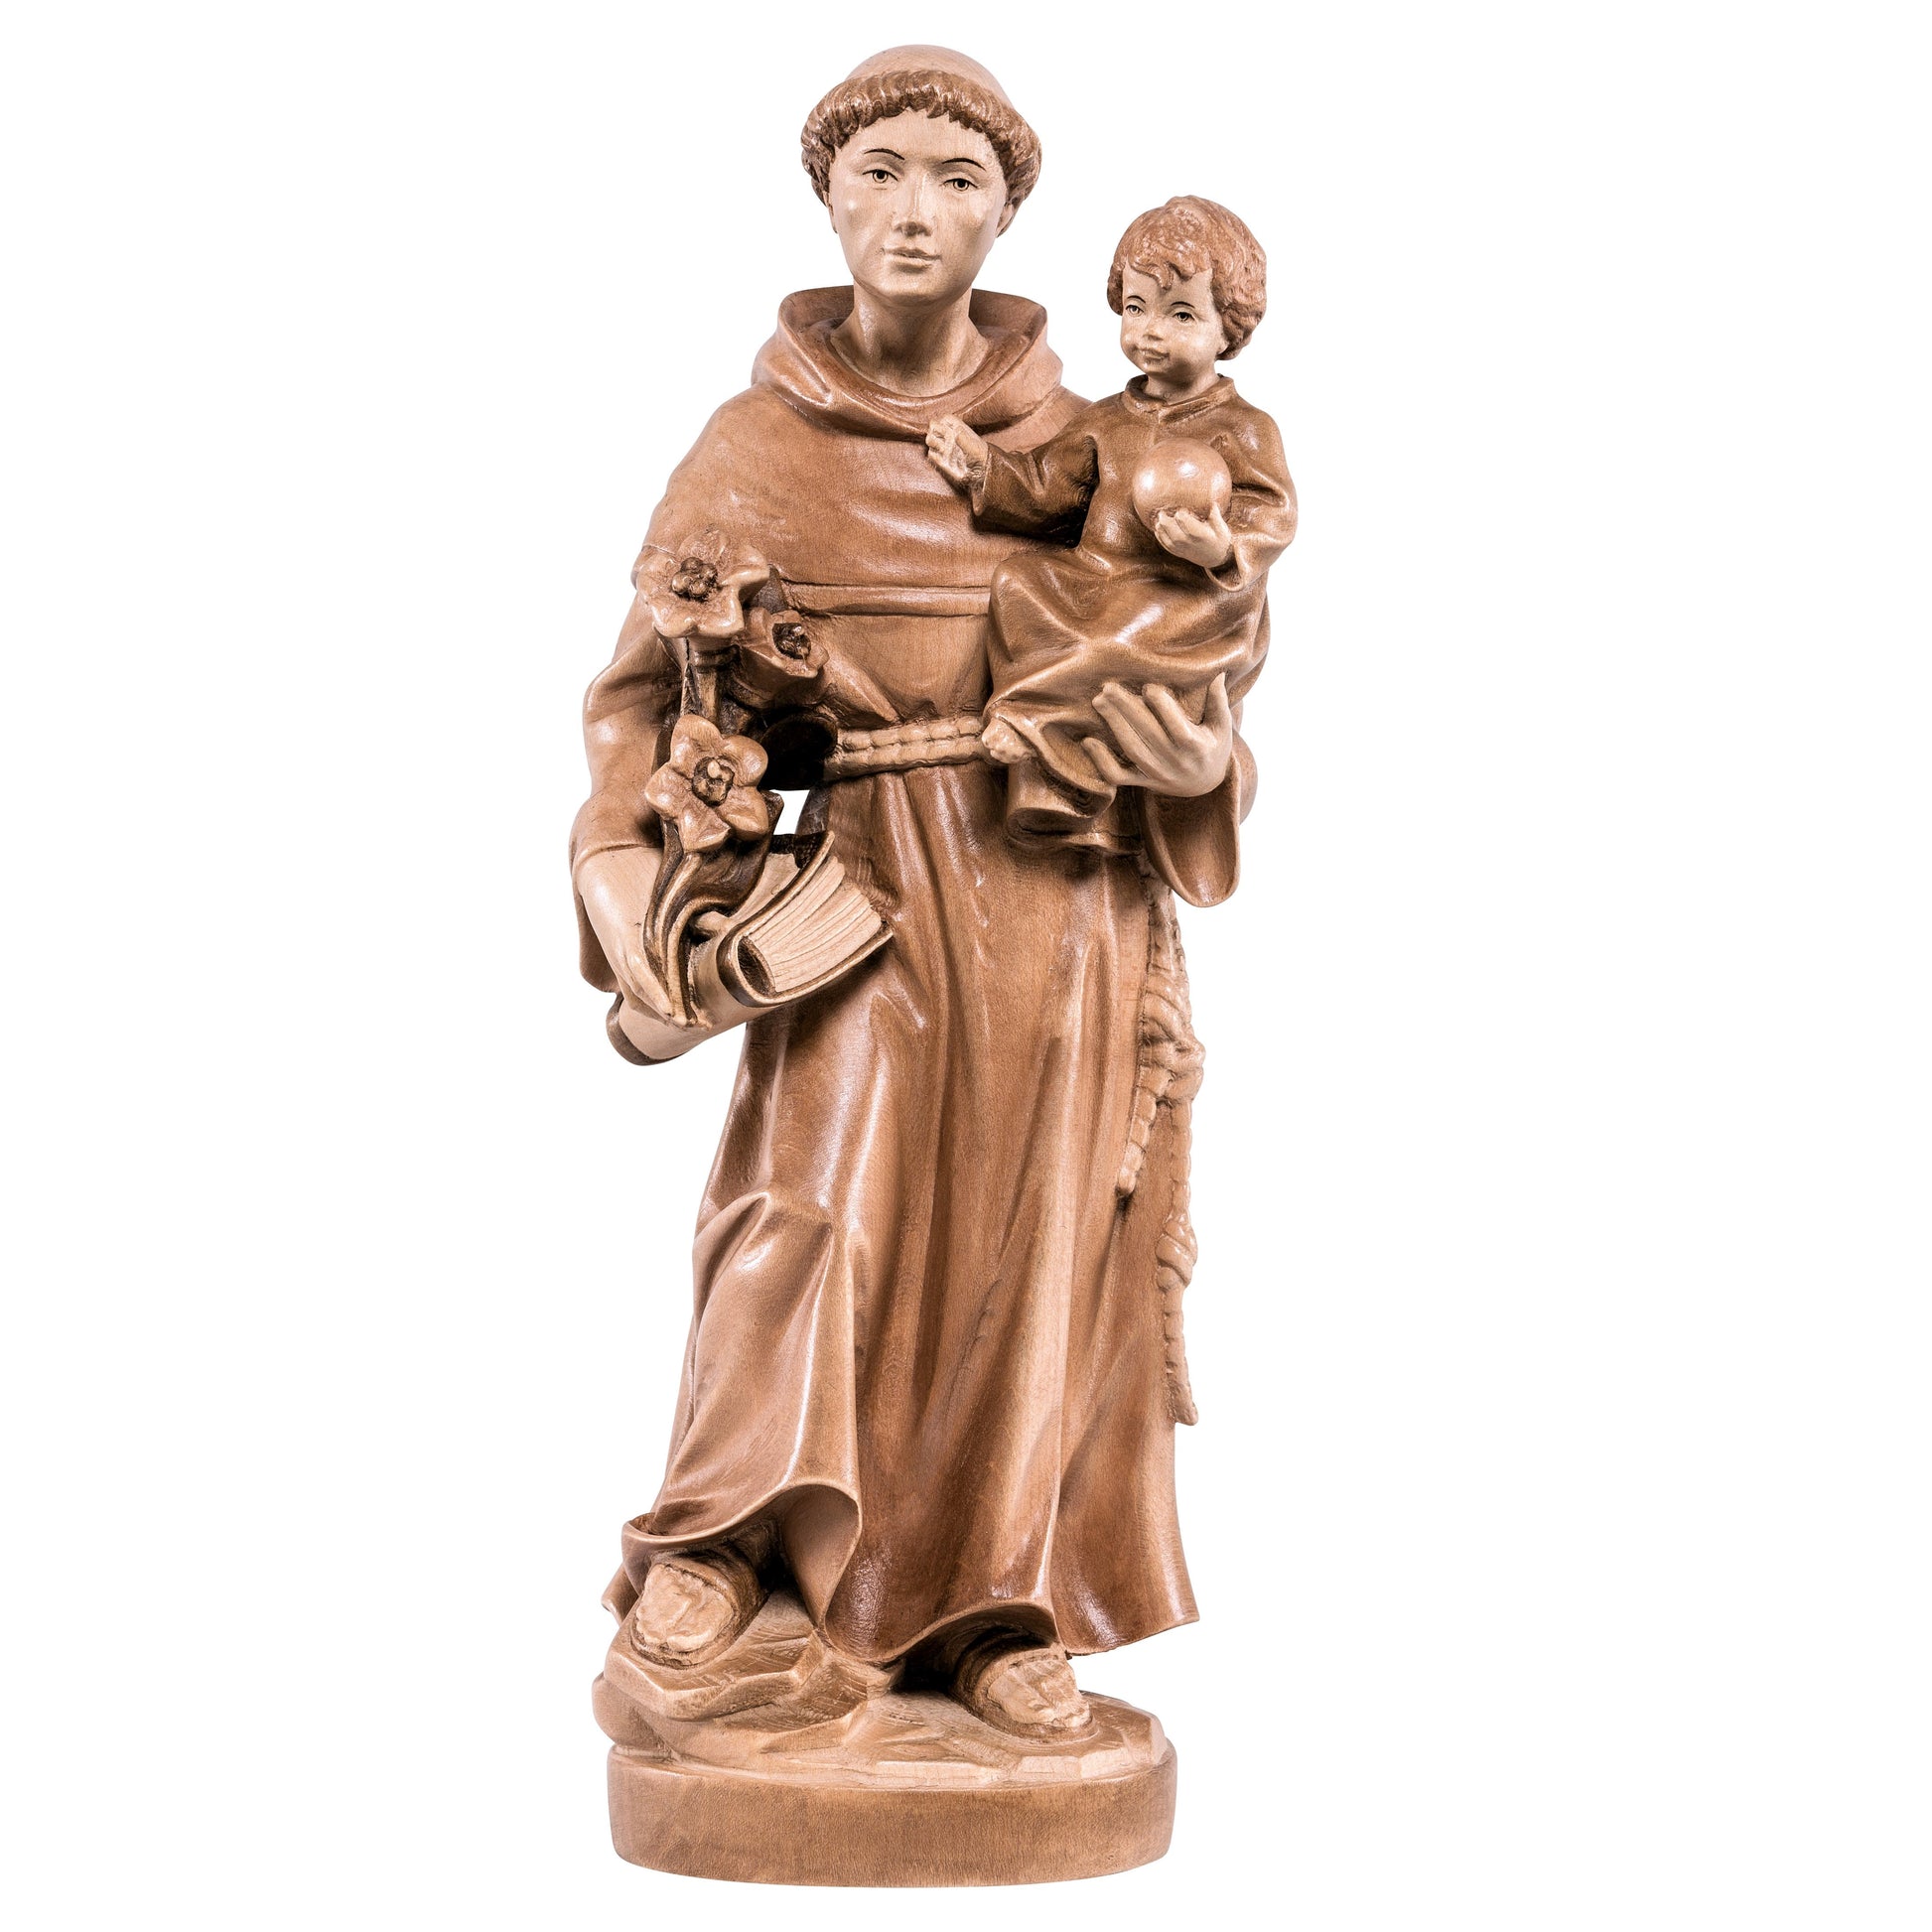 Mondo Cattolico Glossy / 15 cm (5.9 in) Wooden statue of St. Anthony